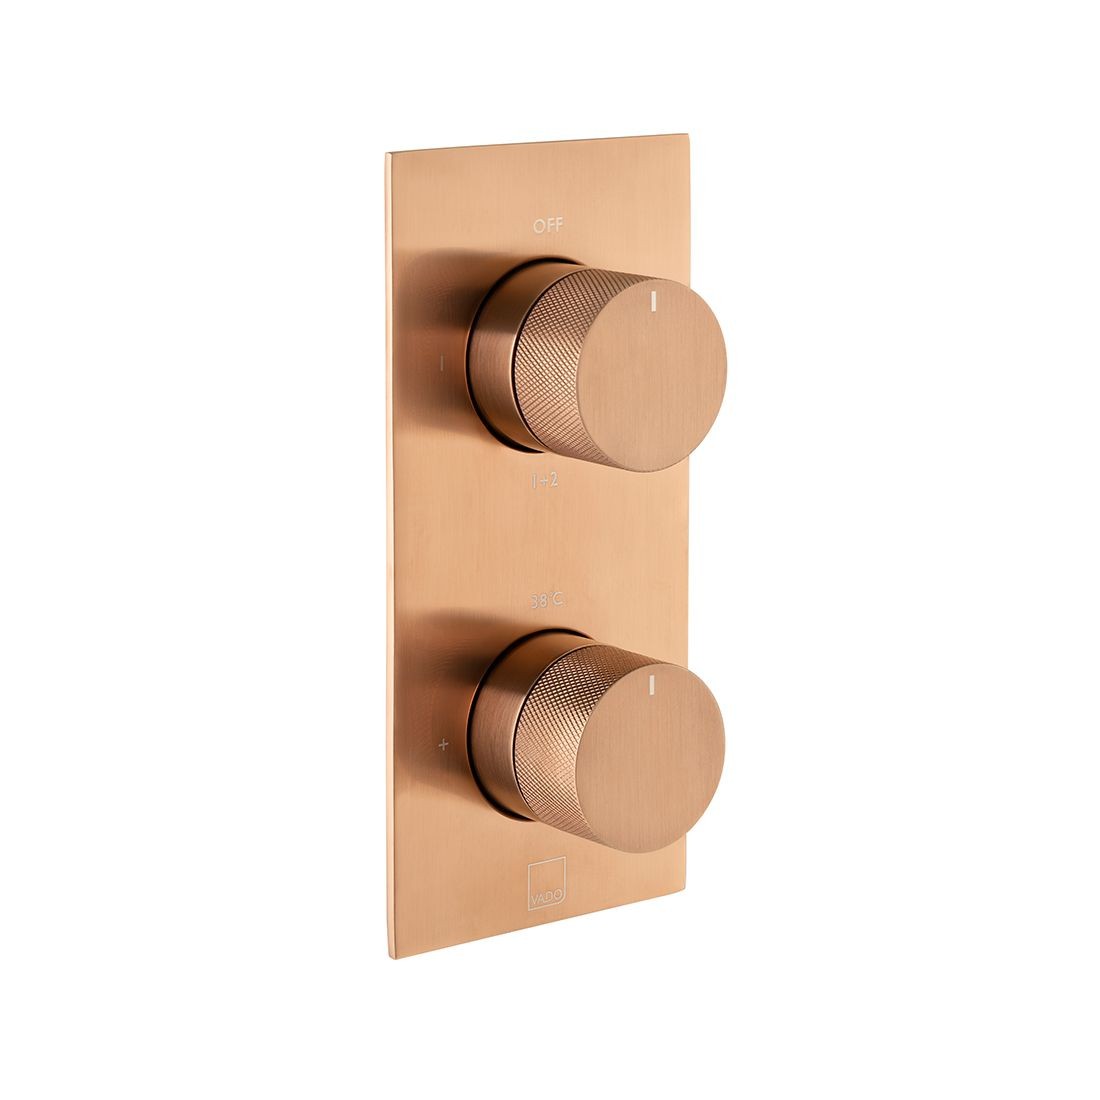 Individual by Vado Thermostatic Shower Valve 2 Outlet Vertical with Knurled Accents Brushed Bronze [IND-T148/2-BRZK]